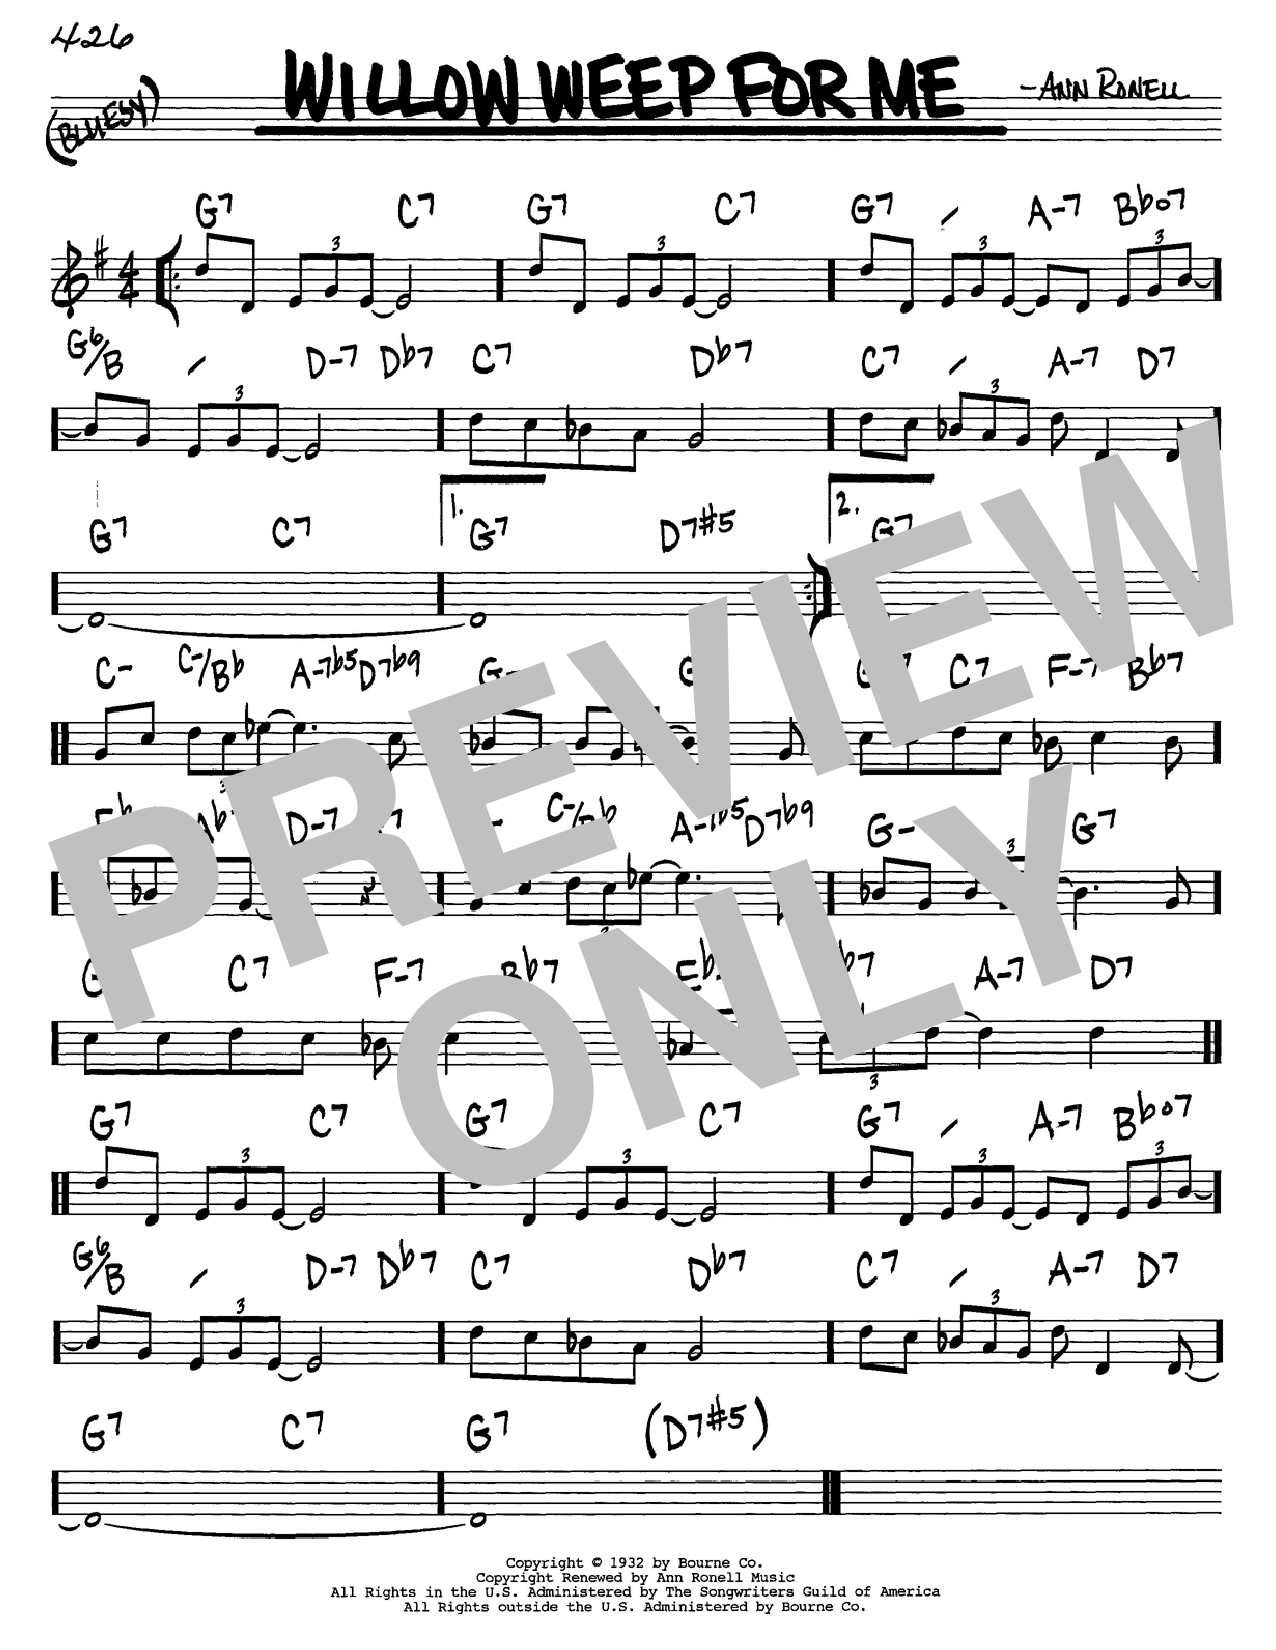 Chad & Jeremy Willow Weep For Me sheet music preview music notes and score for Guitar Tab including 2 page(s)